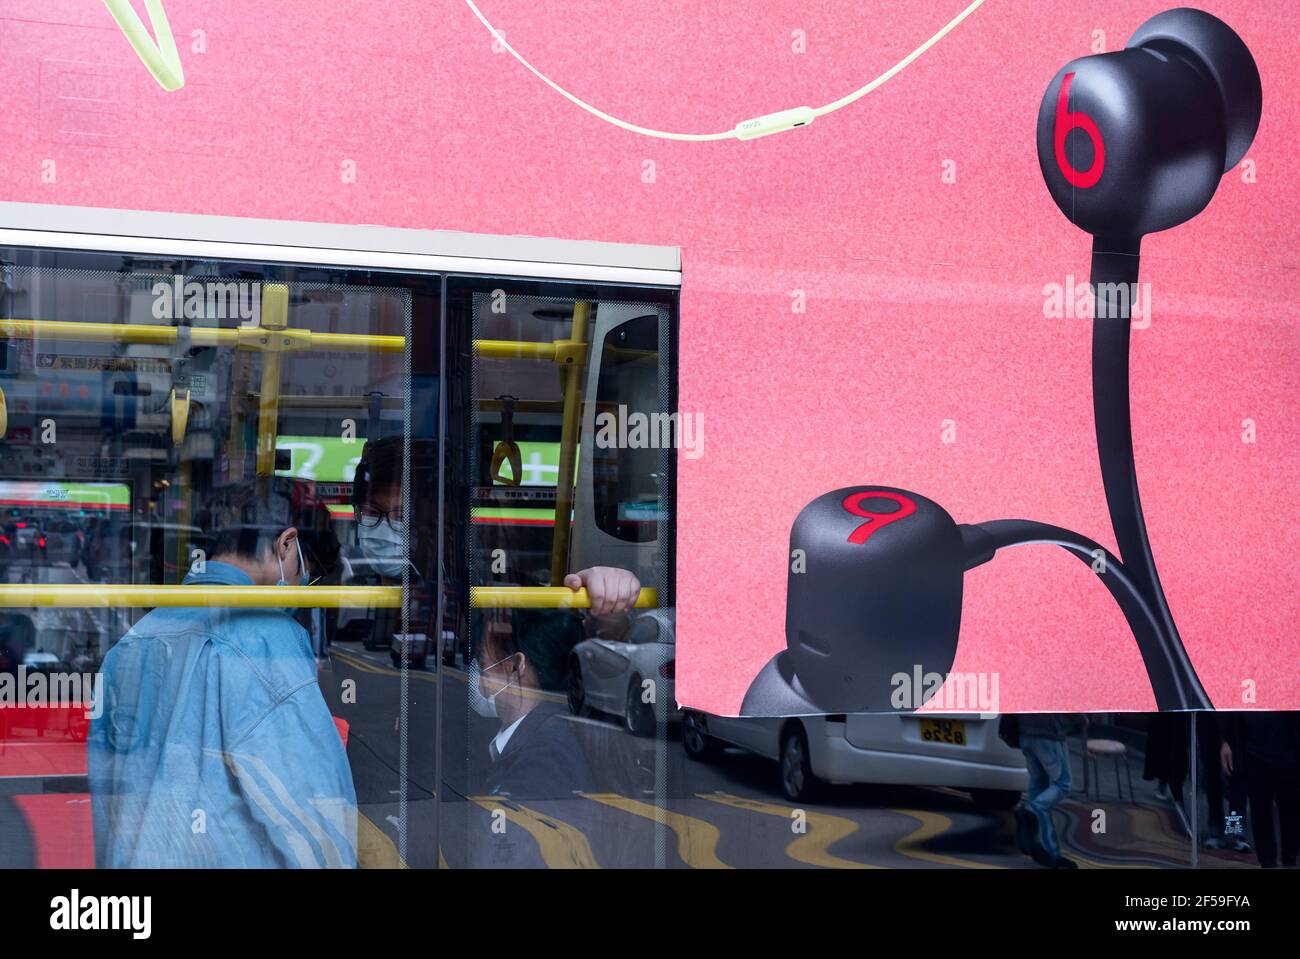 A bus displays a commercial ad of the American consumer audio products manufacturer brand Beats Electronics LLC, also known as Beats by Dr. Dre or simply Beats by Dre, in Hong Kong. Stock Photo